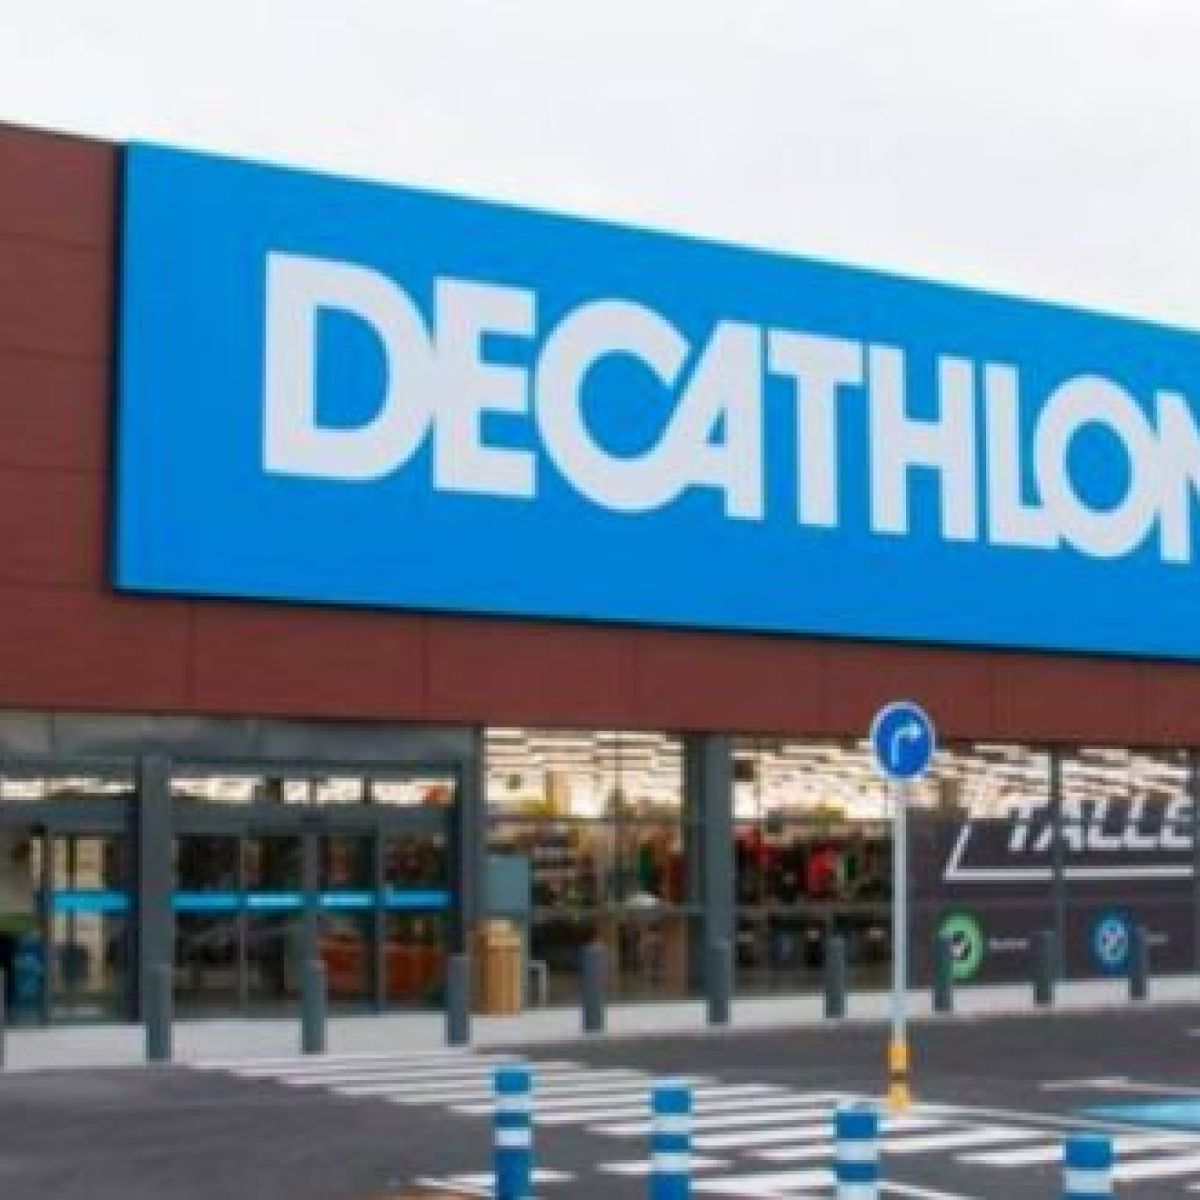 Decathlon to open in Ballymun after €4 